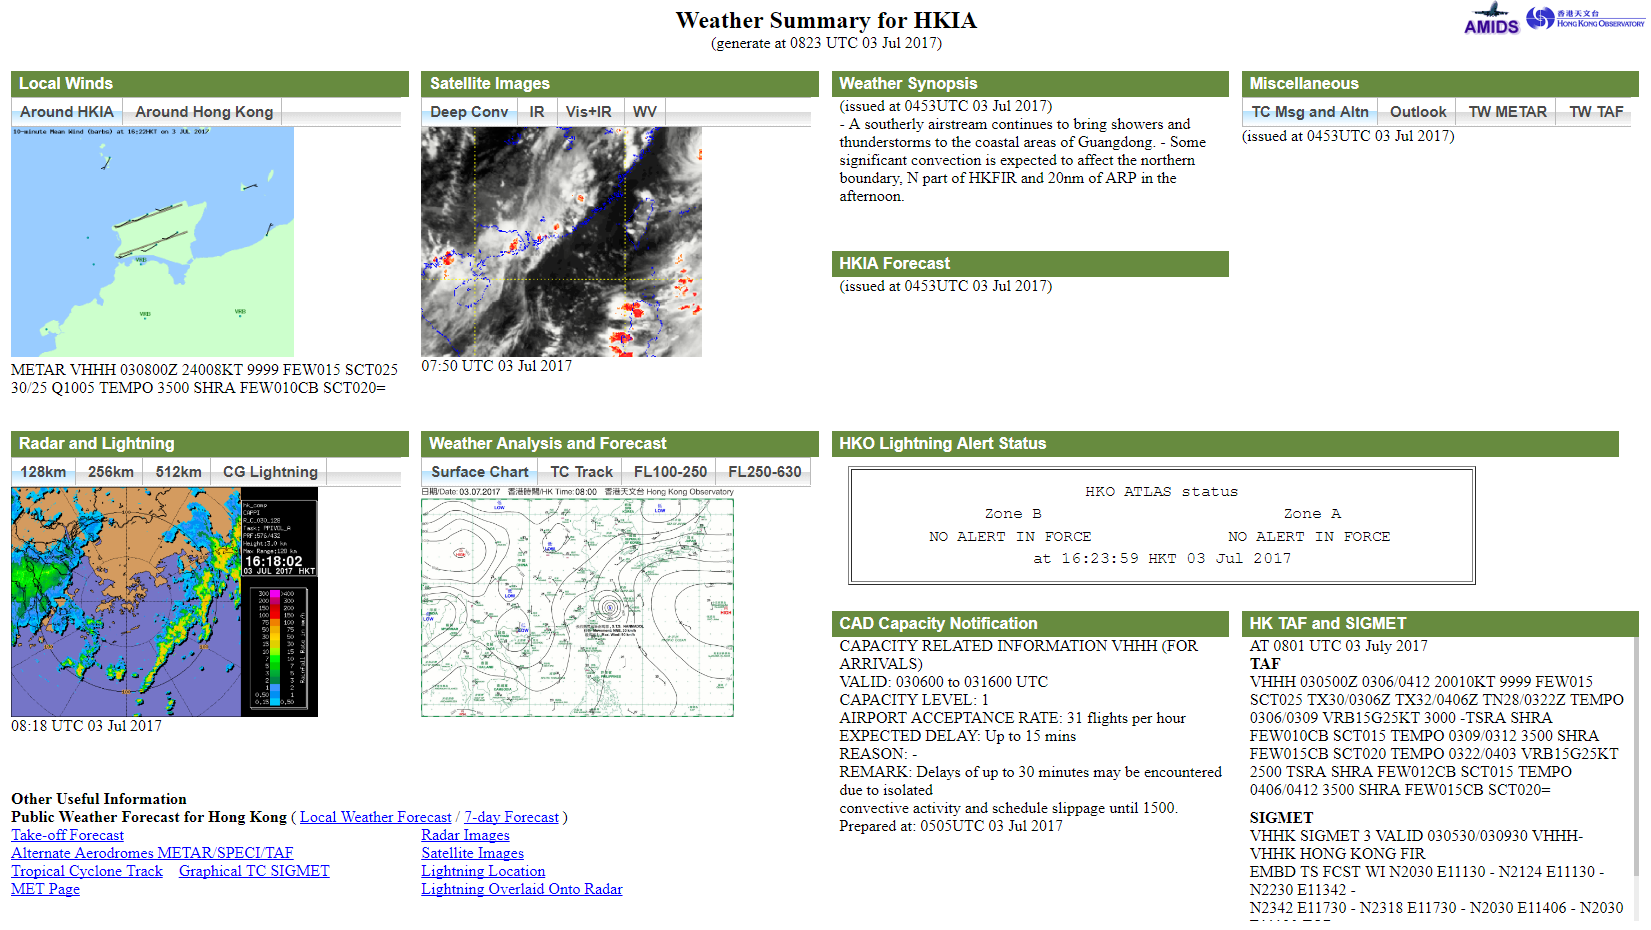 The new, enhanced Weather Summary page on AMIDS.